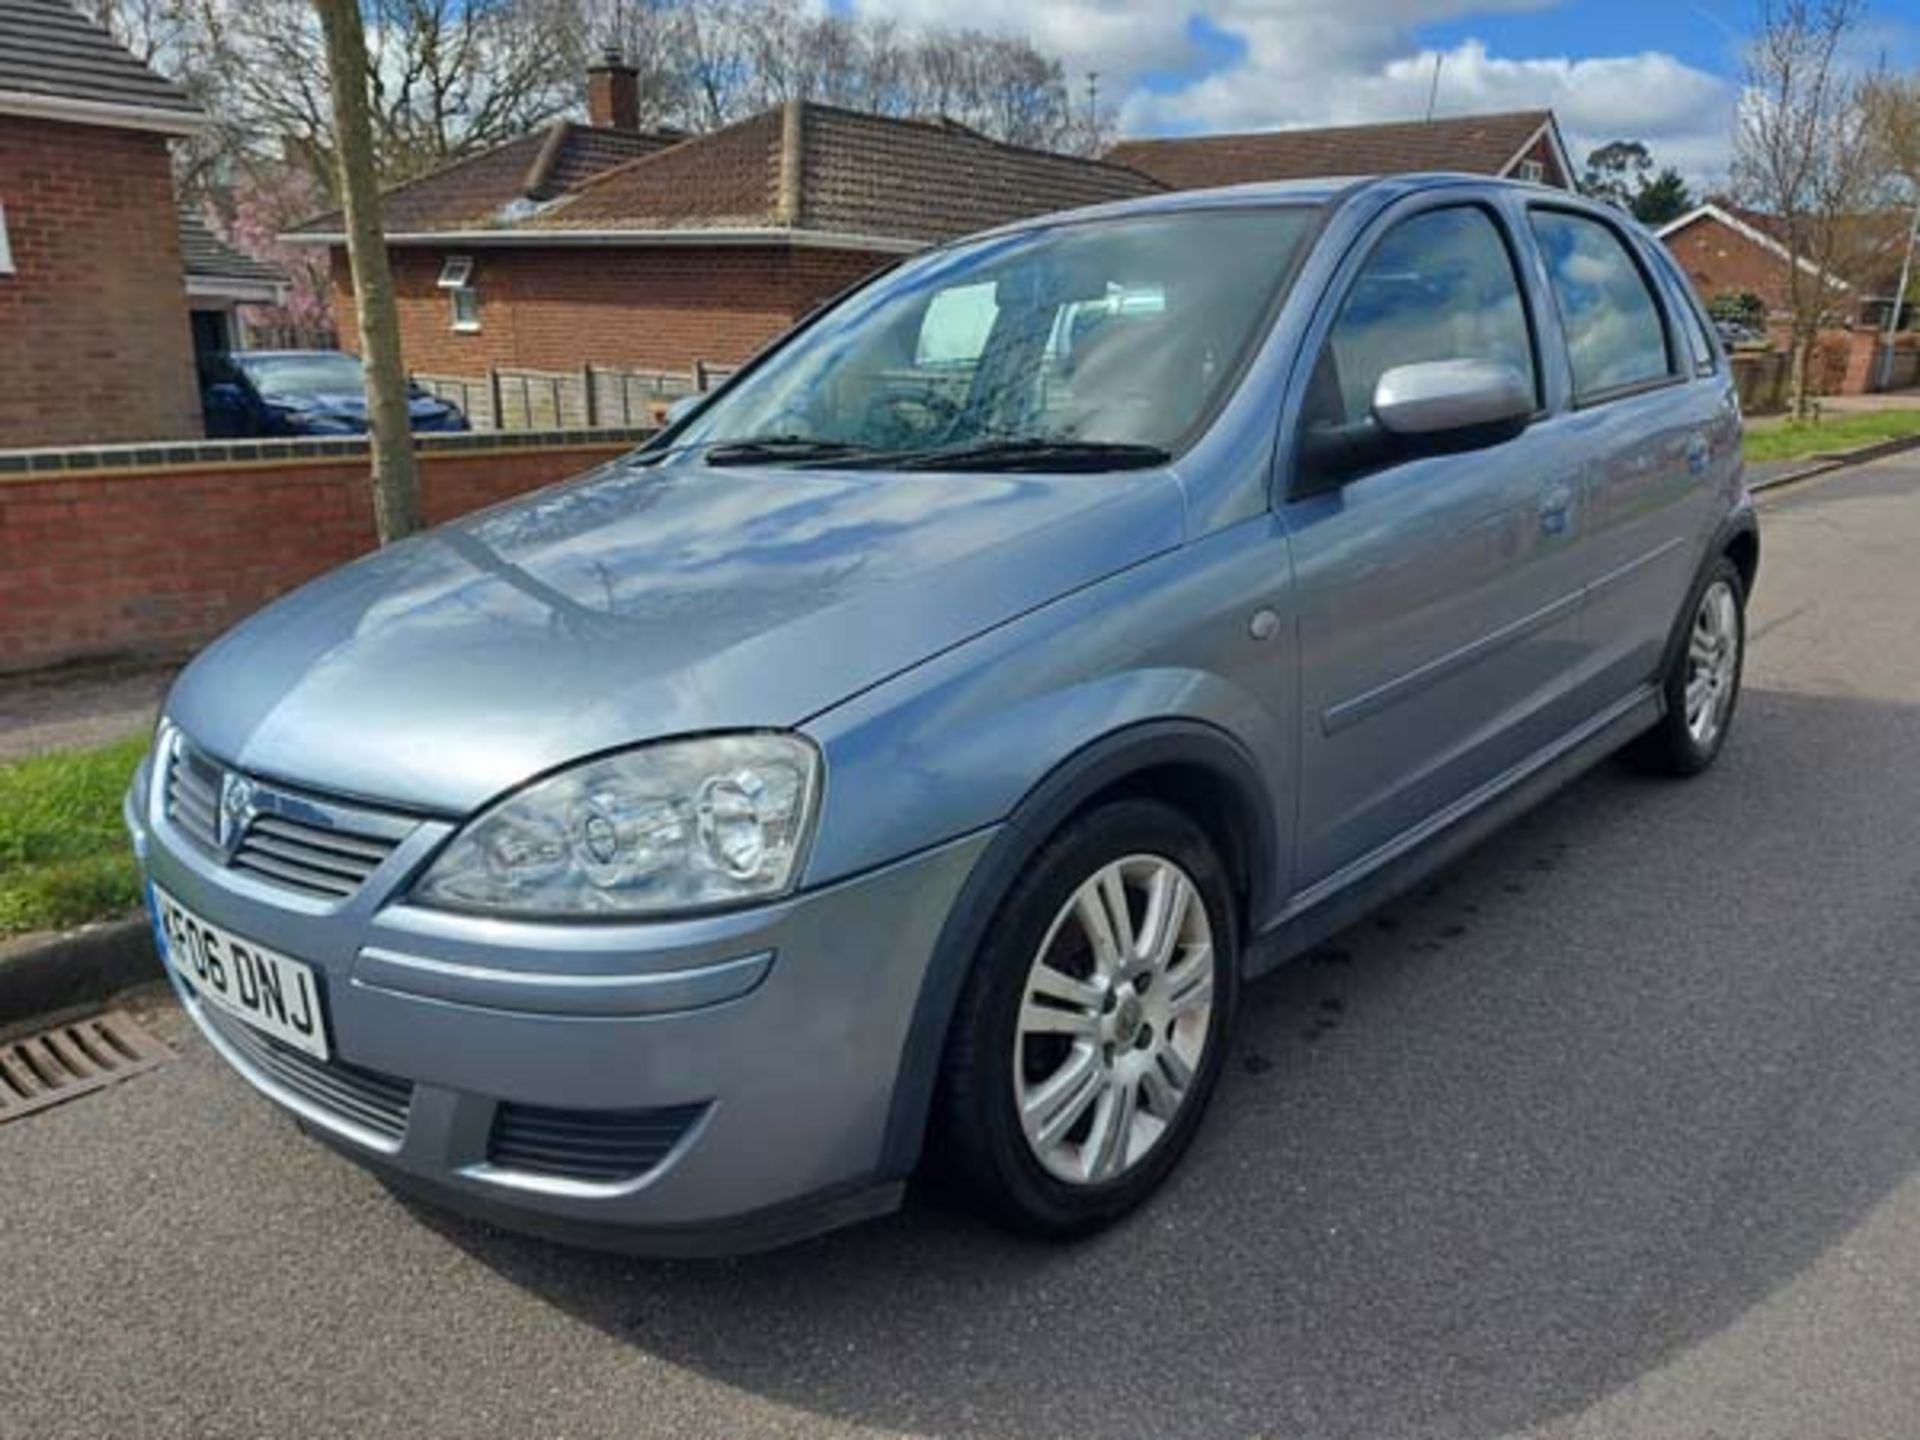 Vauxhall Corsa 1.4 Active Automatic in silver, 5 door hatchback, first registered 03/03/2006, MOT - Image 4 of 15